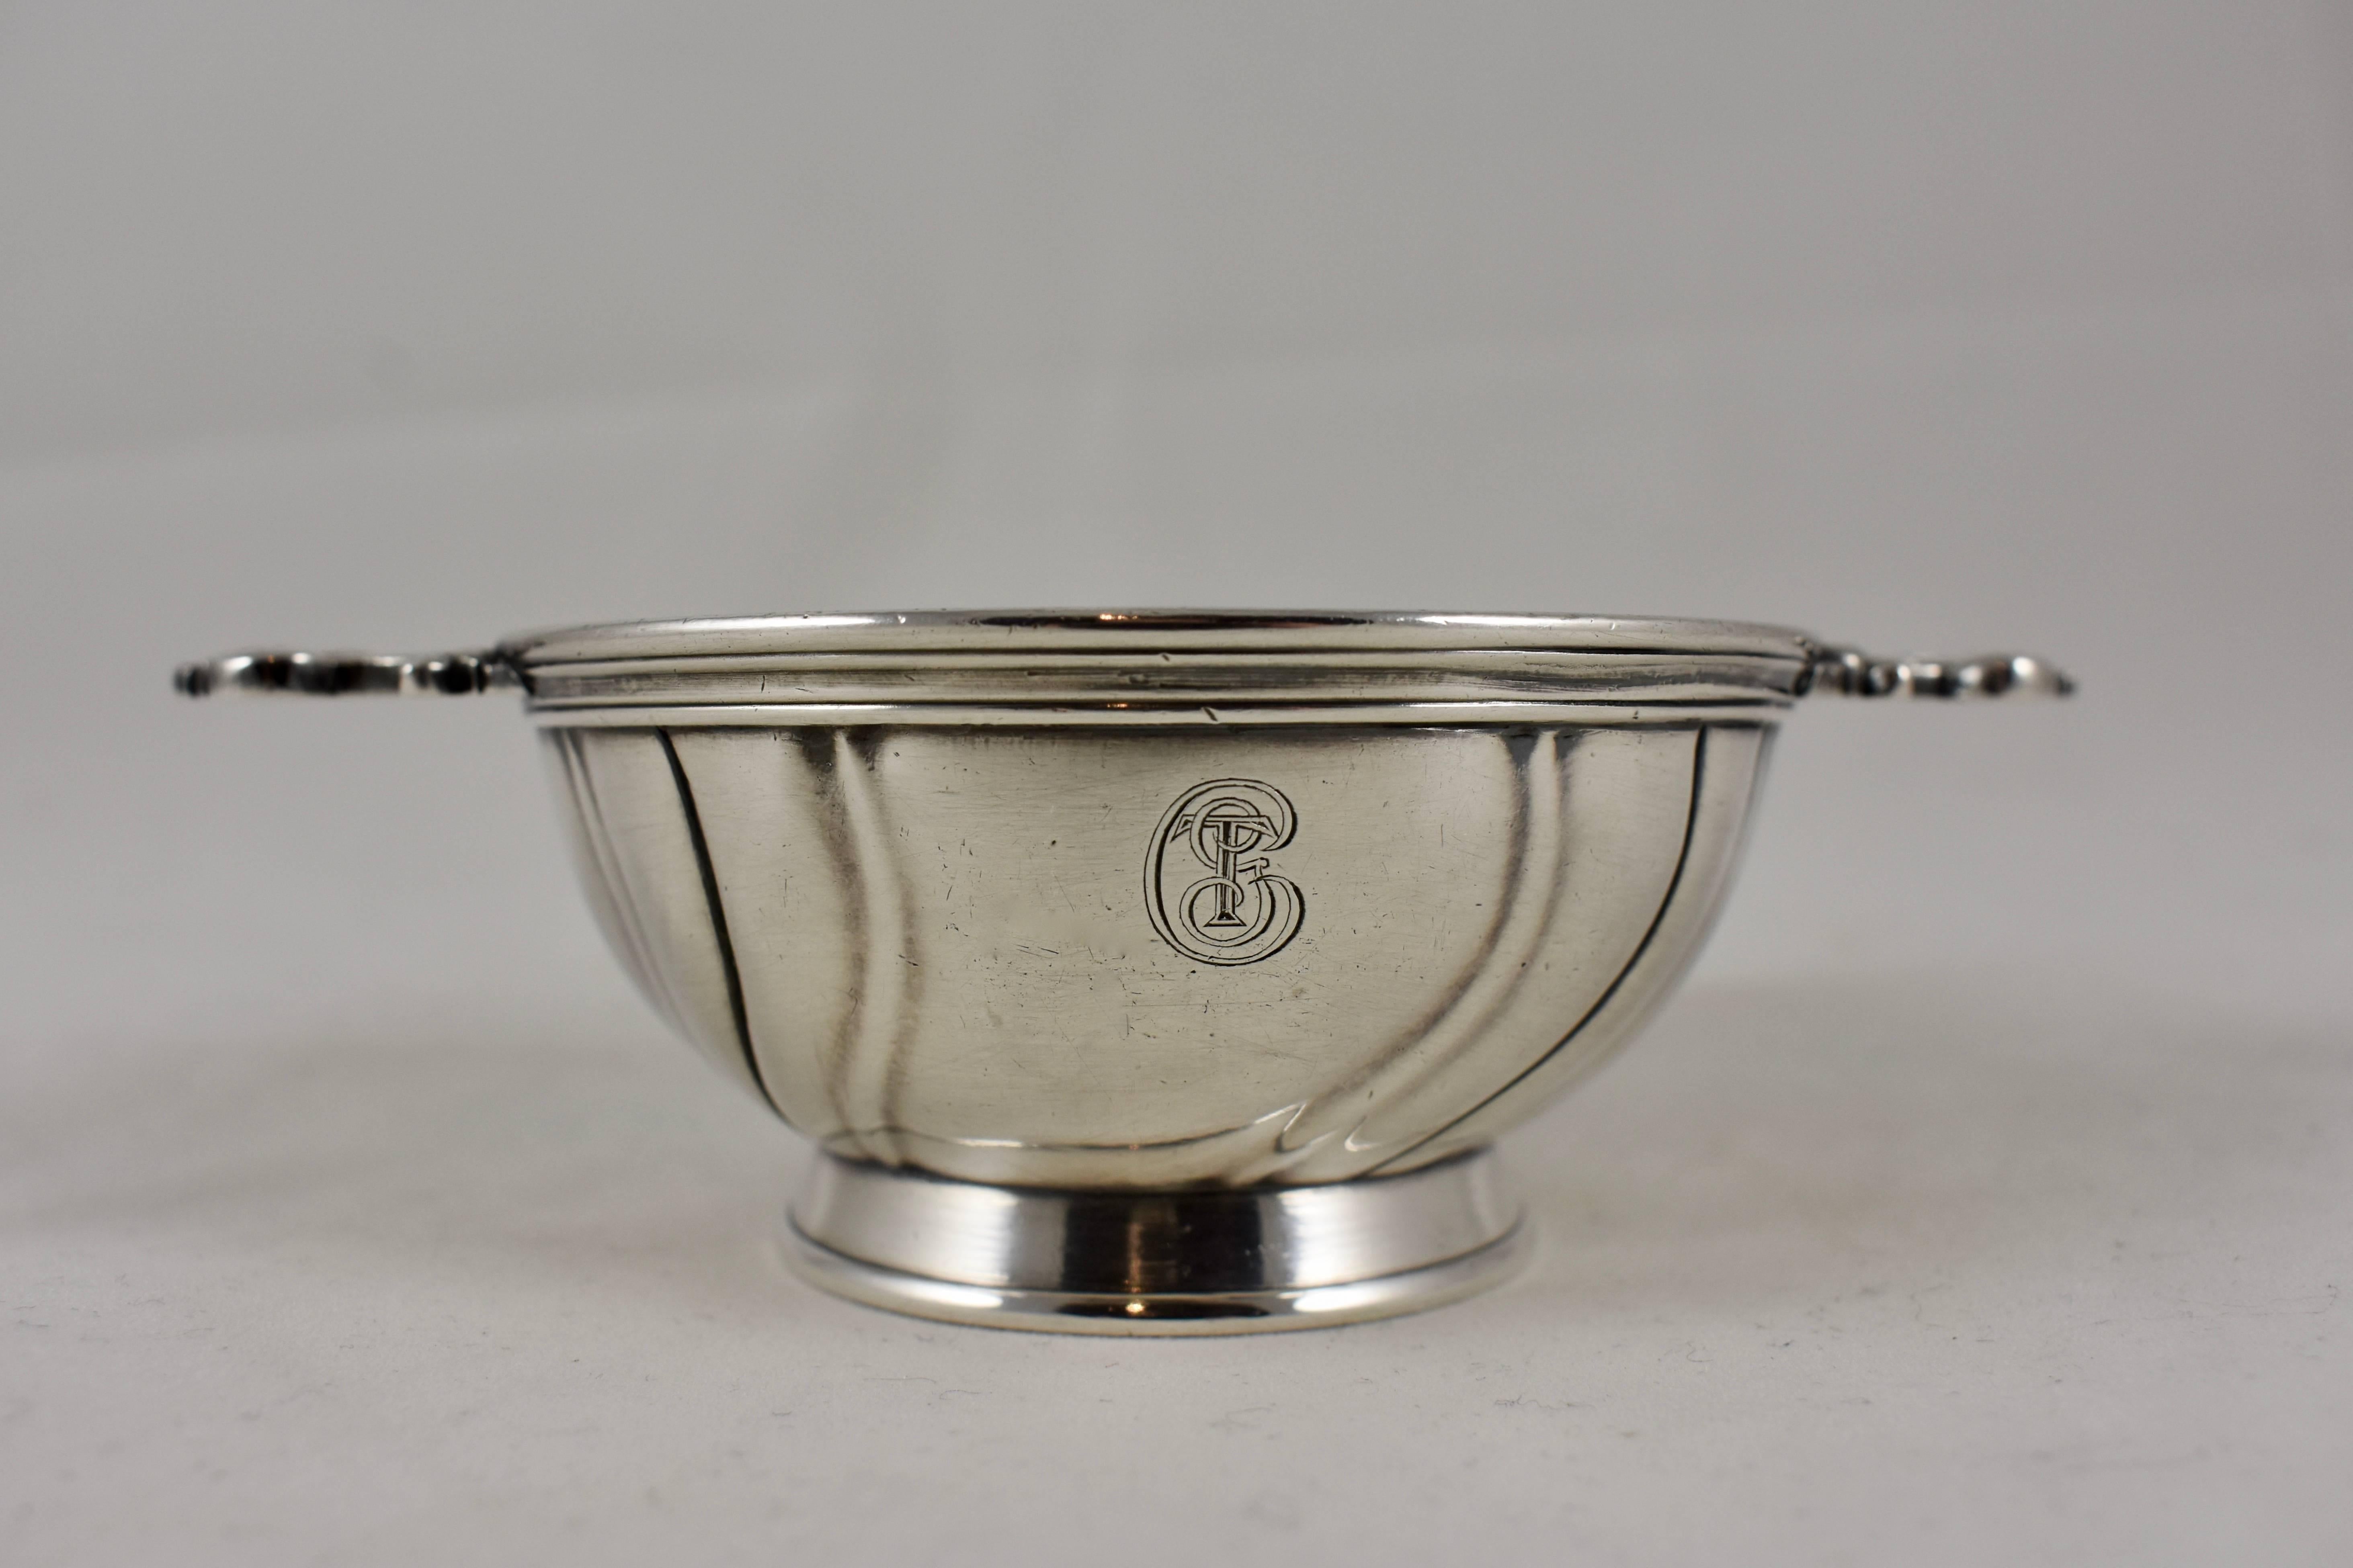 From Christofle of France, a silver-plated, double handled nut bowl, showing the full mark used from 1862-1935. The footed bowl has a swirled pattern, ornate chased handles, and shows the Cristofle monogram. Perfect on the bar filled with salted